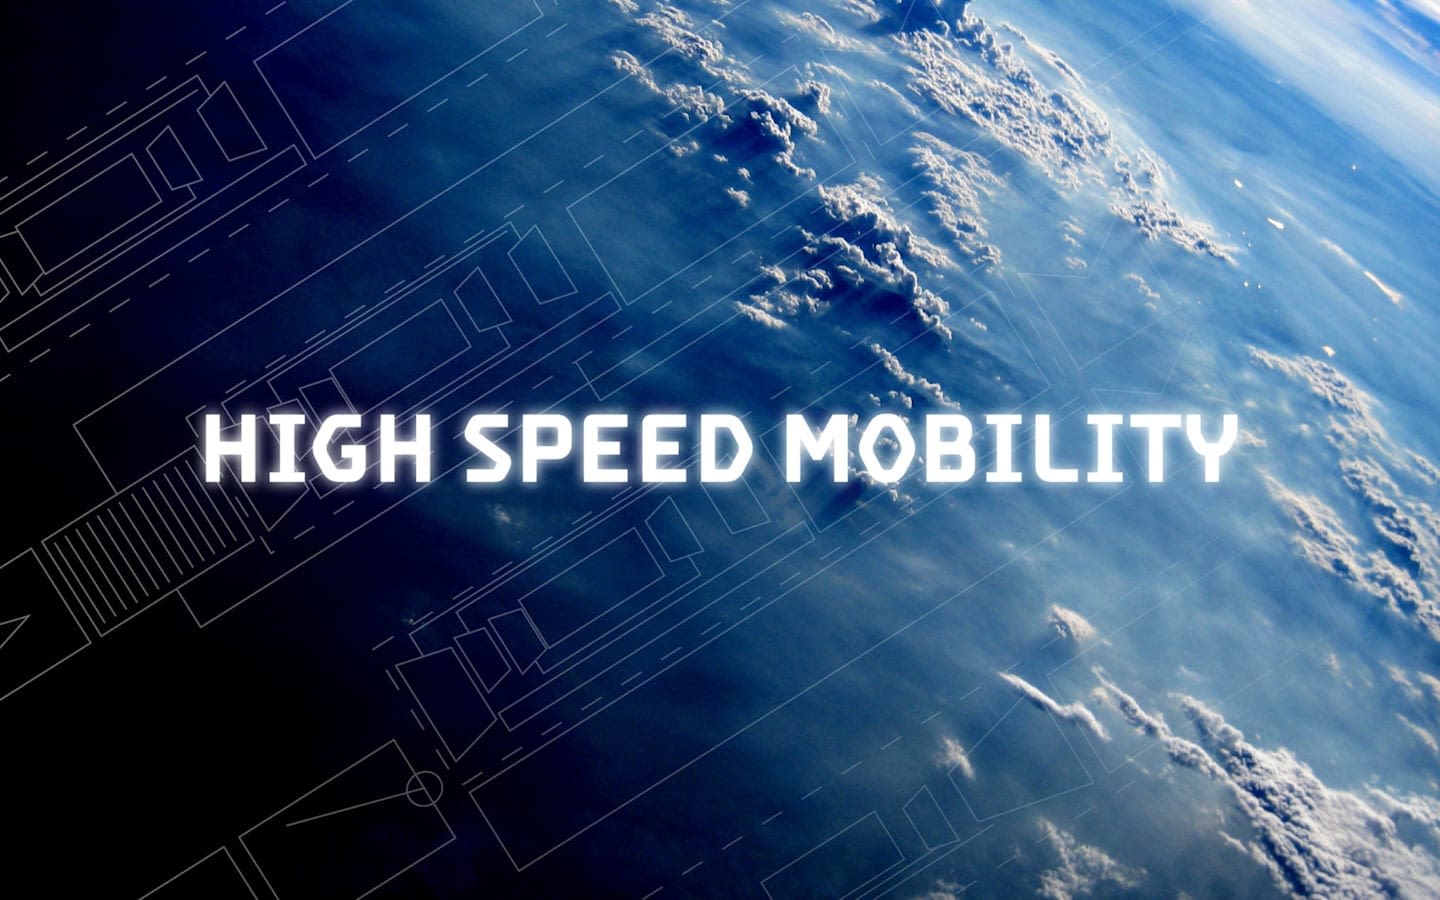 blue print graphics of Virgin Galactic Spacecraft super imposed on to an Earth's atmosphere background.  The Words "High speed mobility" in white text